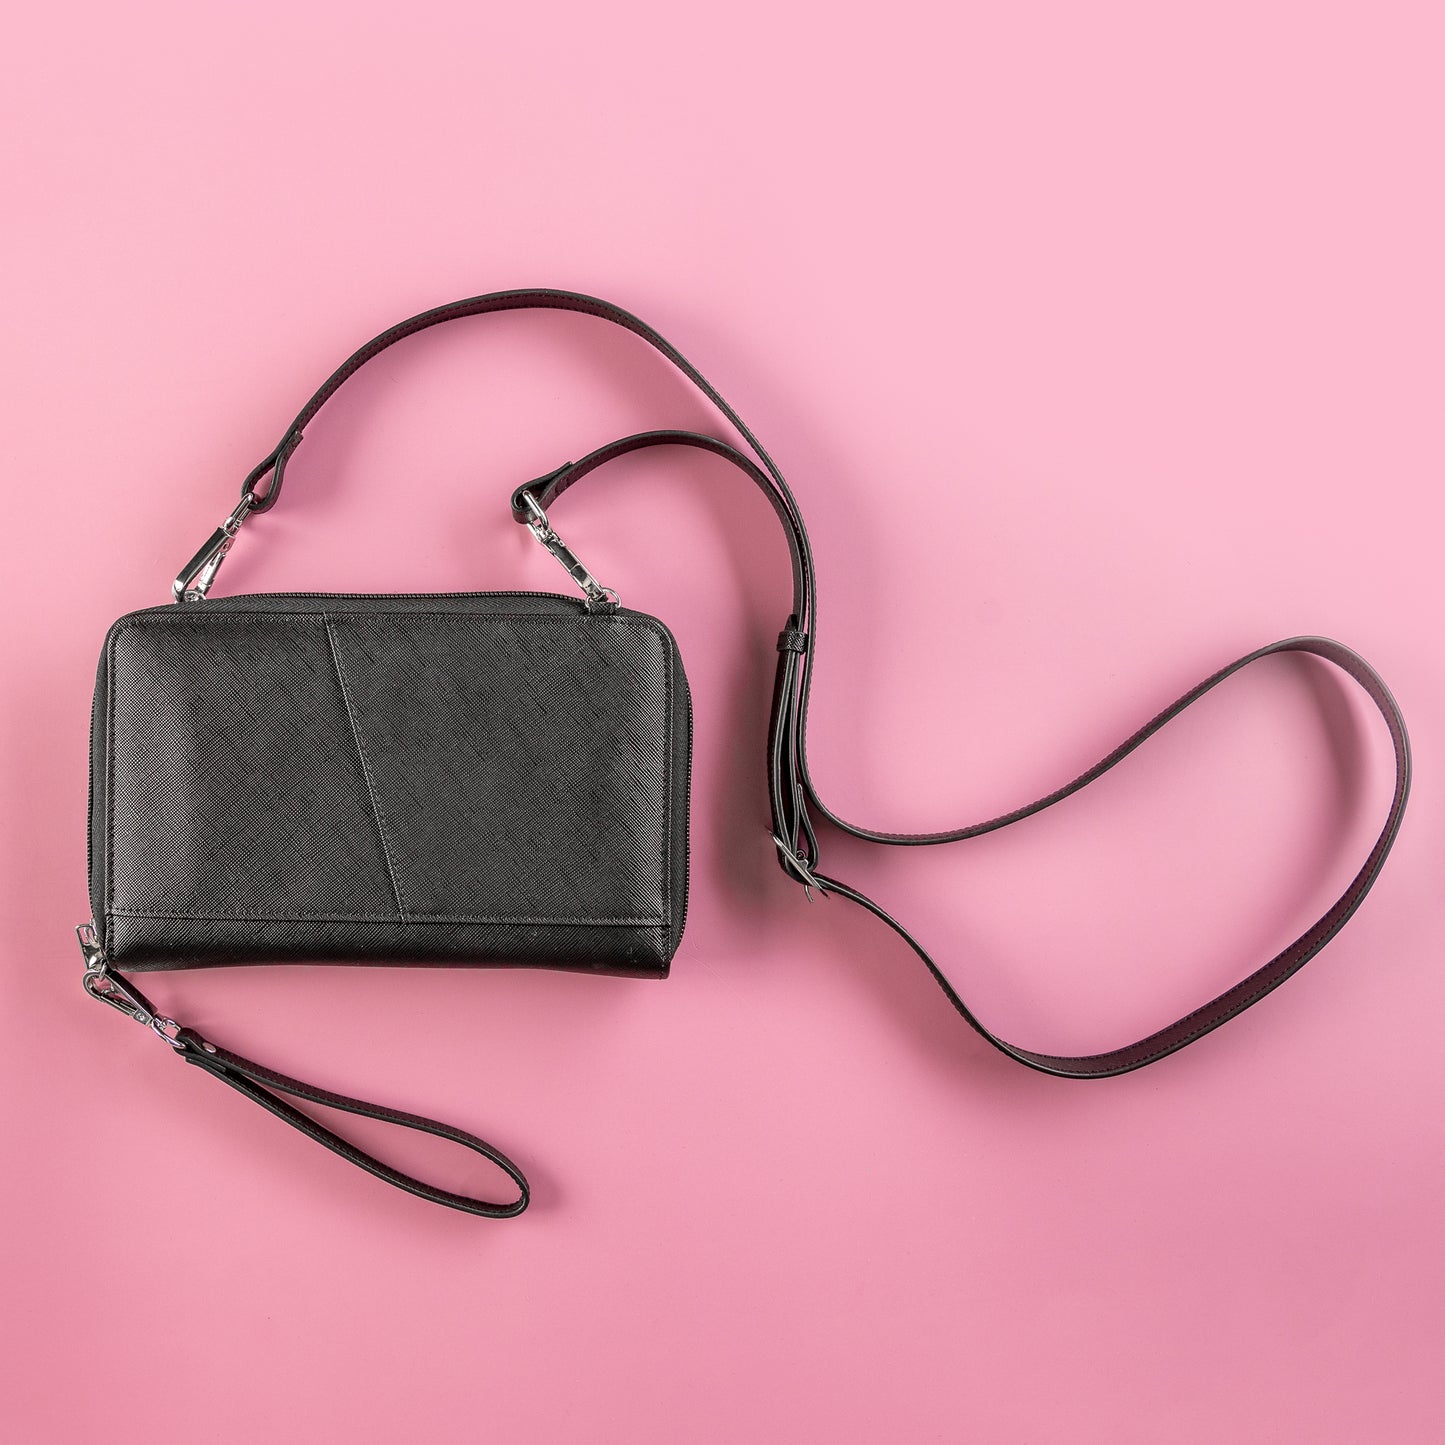 black passport wallet with wrist and bag strap on a pink background